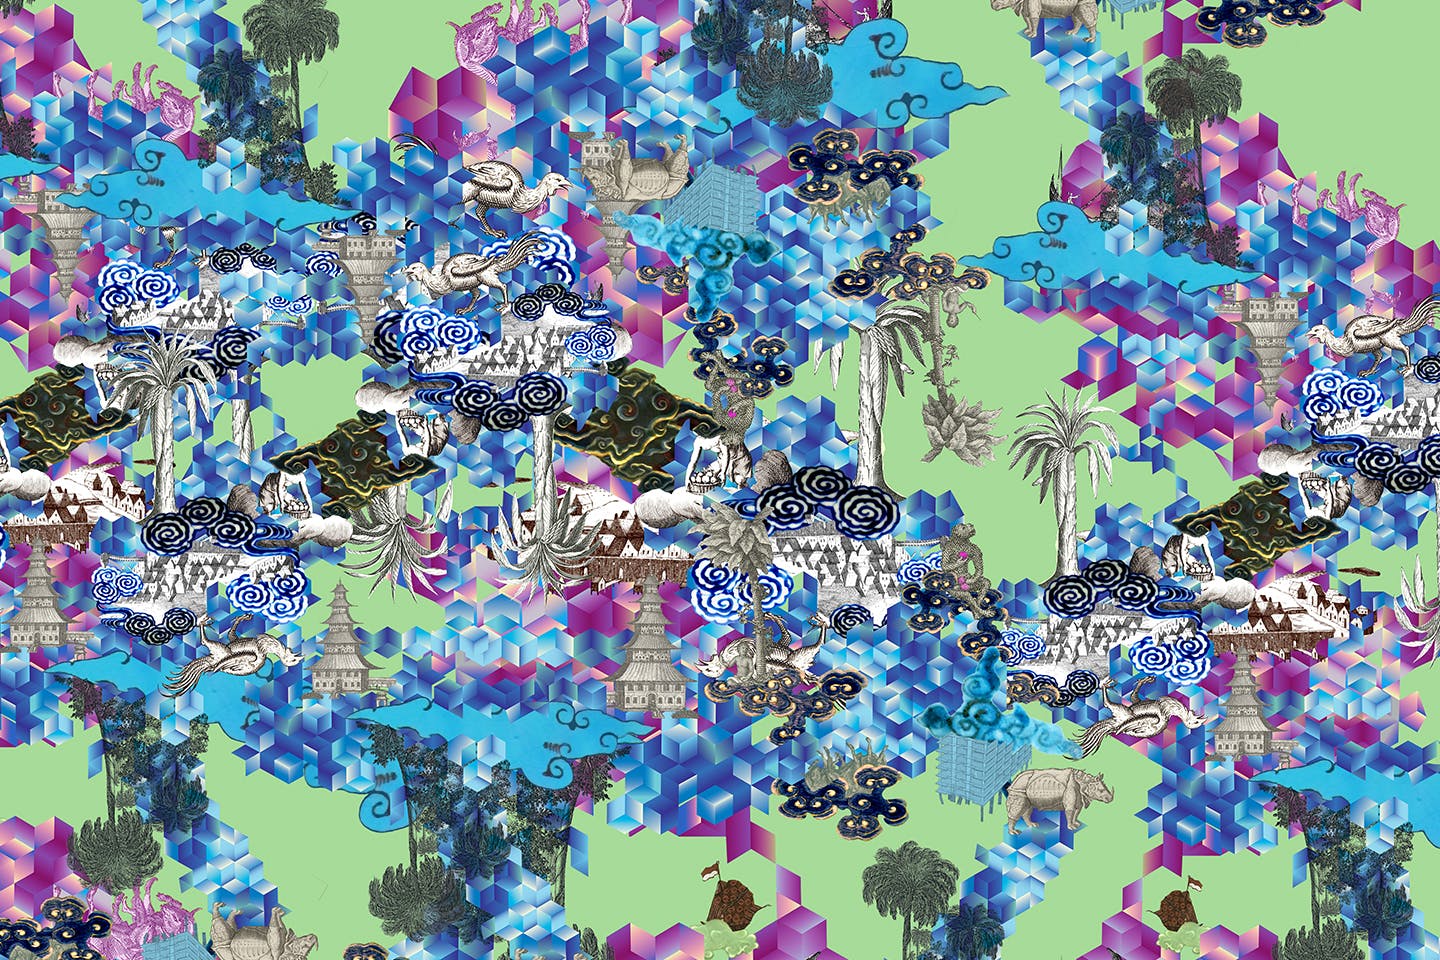 A graphic pattern made up of a purple, blue and green geometric background with various illustrations of buildings, swirling clouds, imaginary birds and plants superimposed on top.